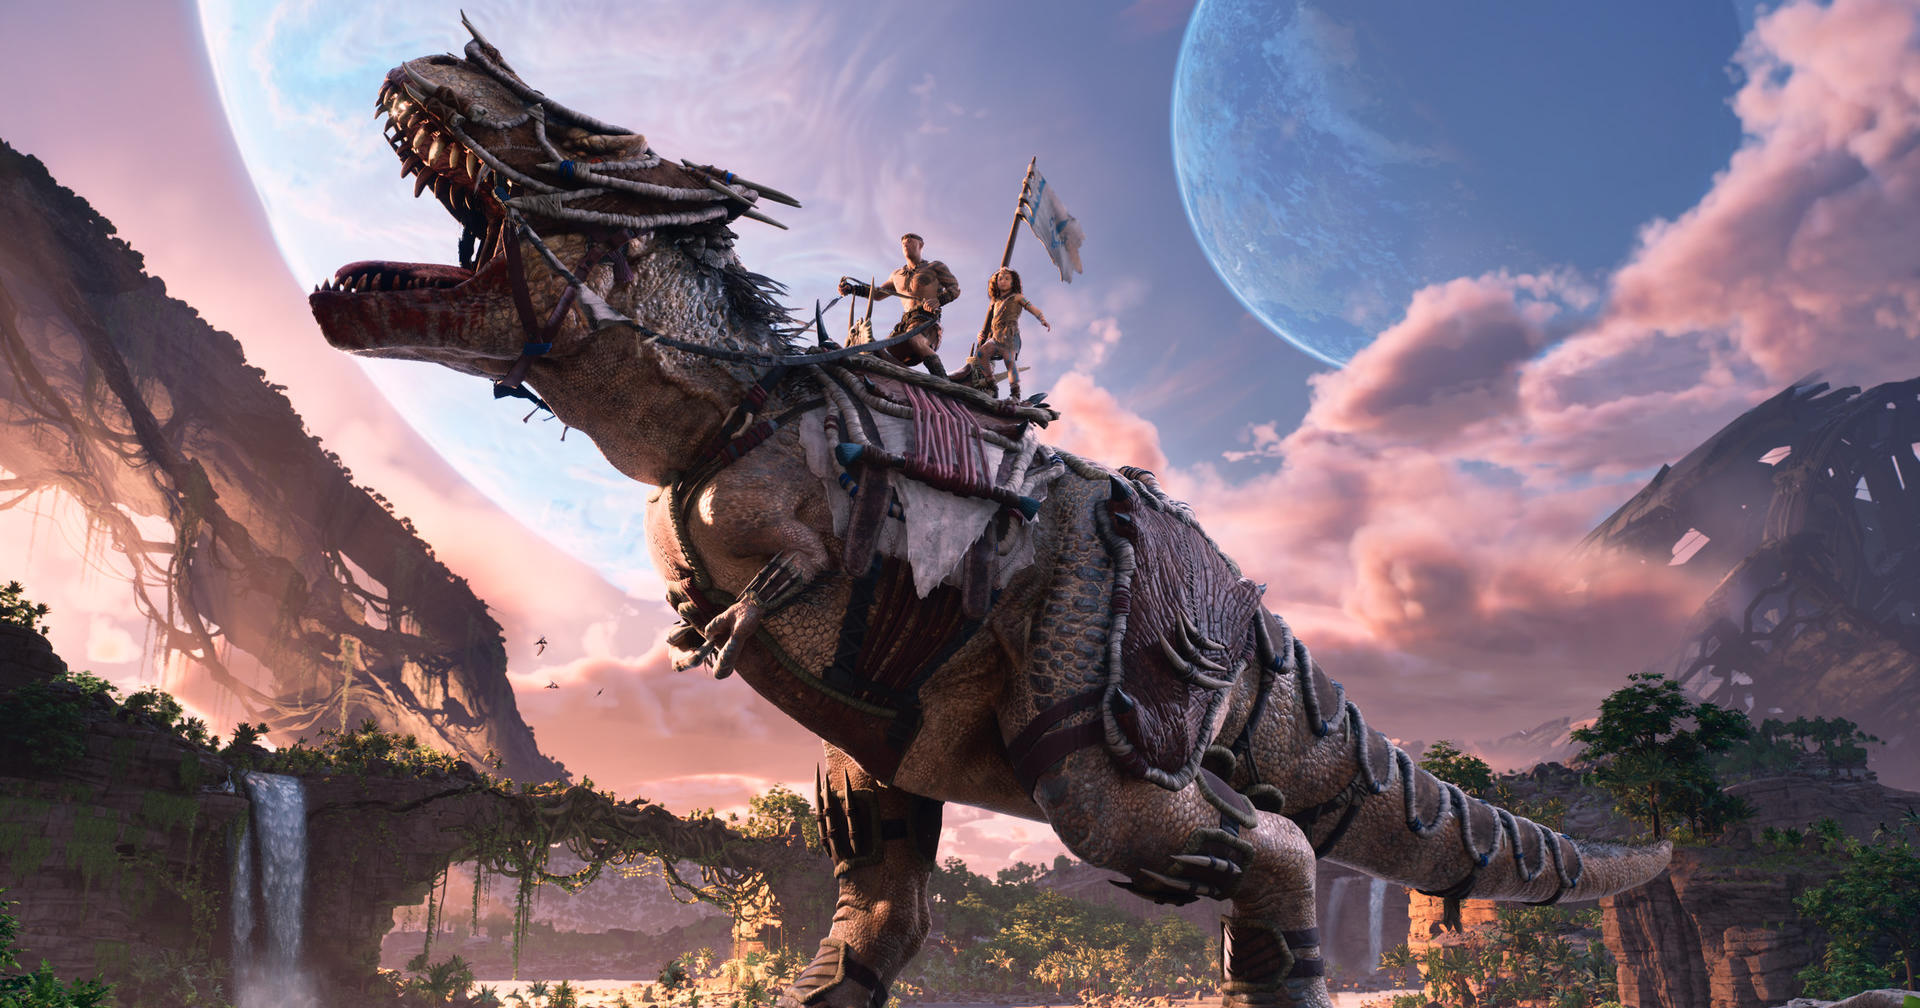 Look forward to great gameplay in Ark 2 and riding a T-Rex, like actor Vin Diesel here. The release has been postponed again.